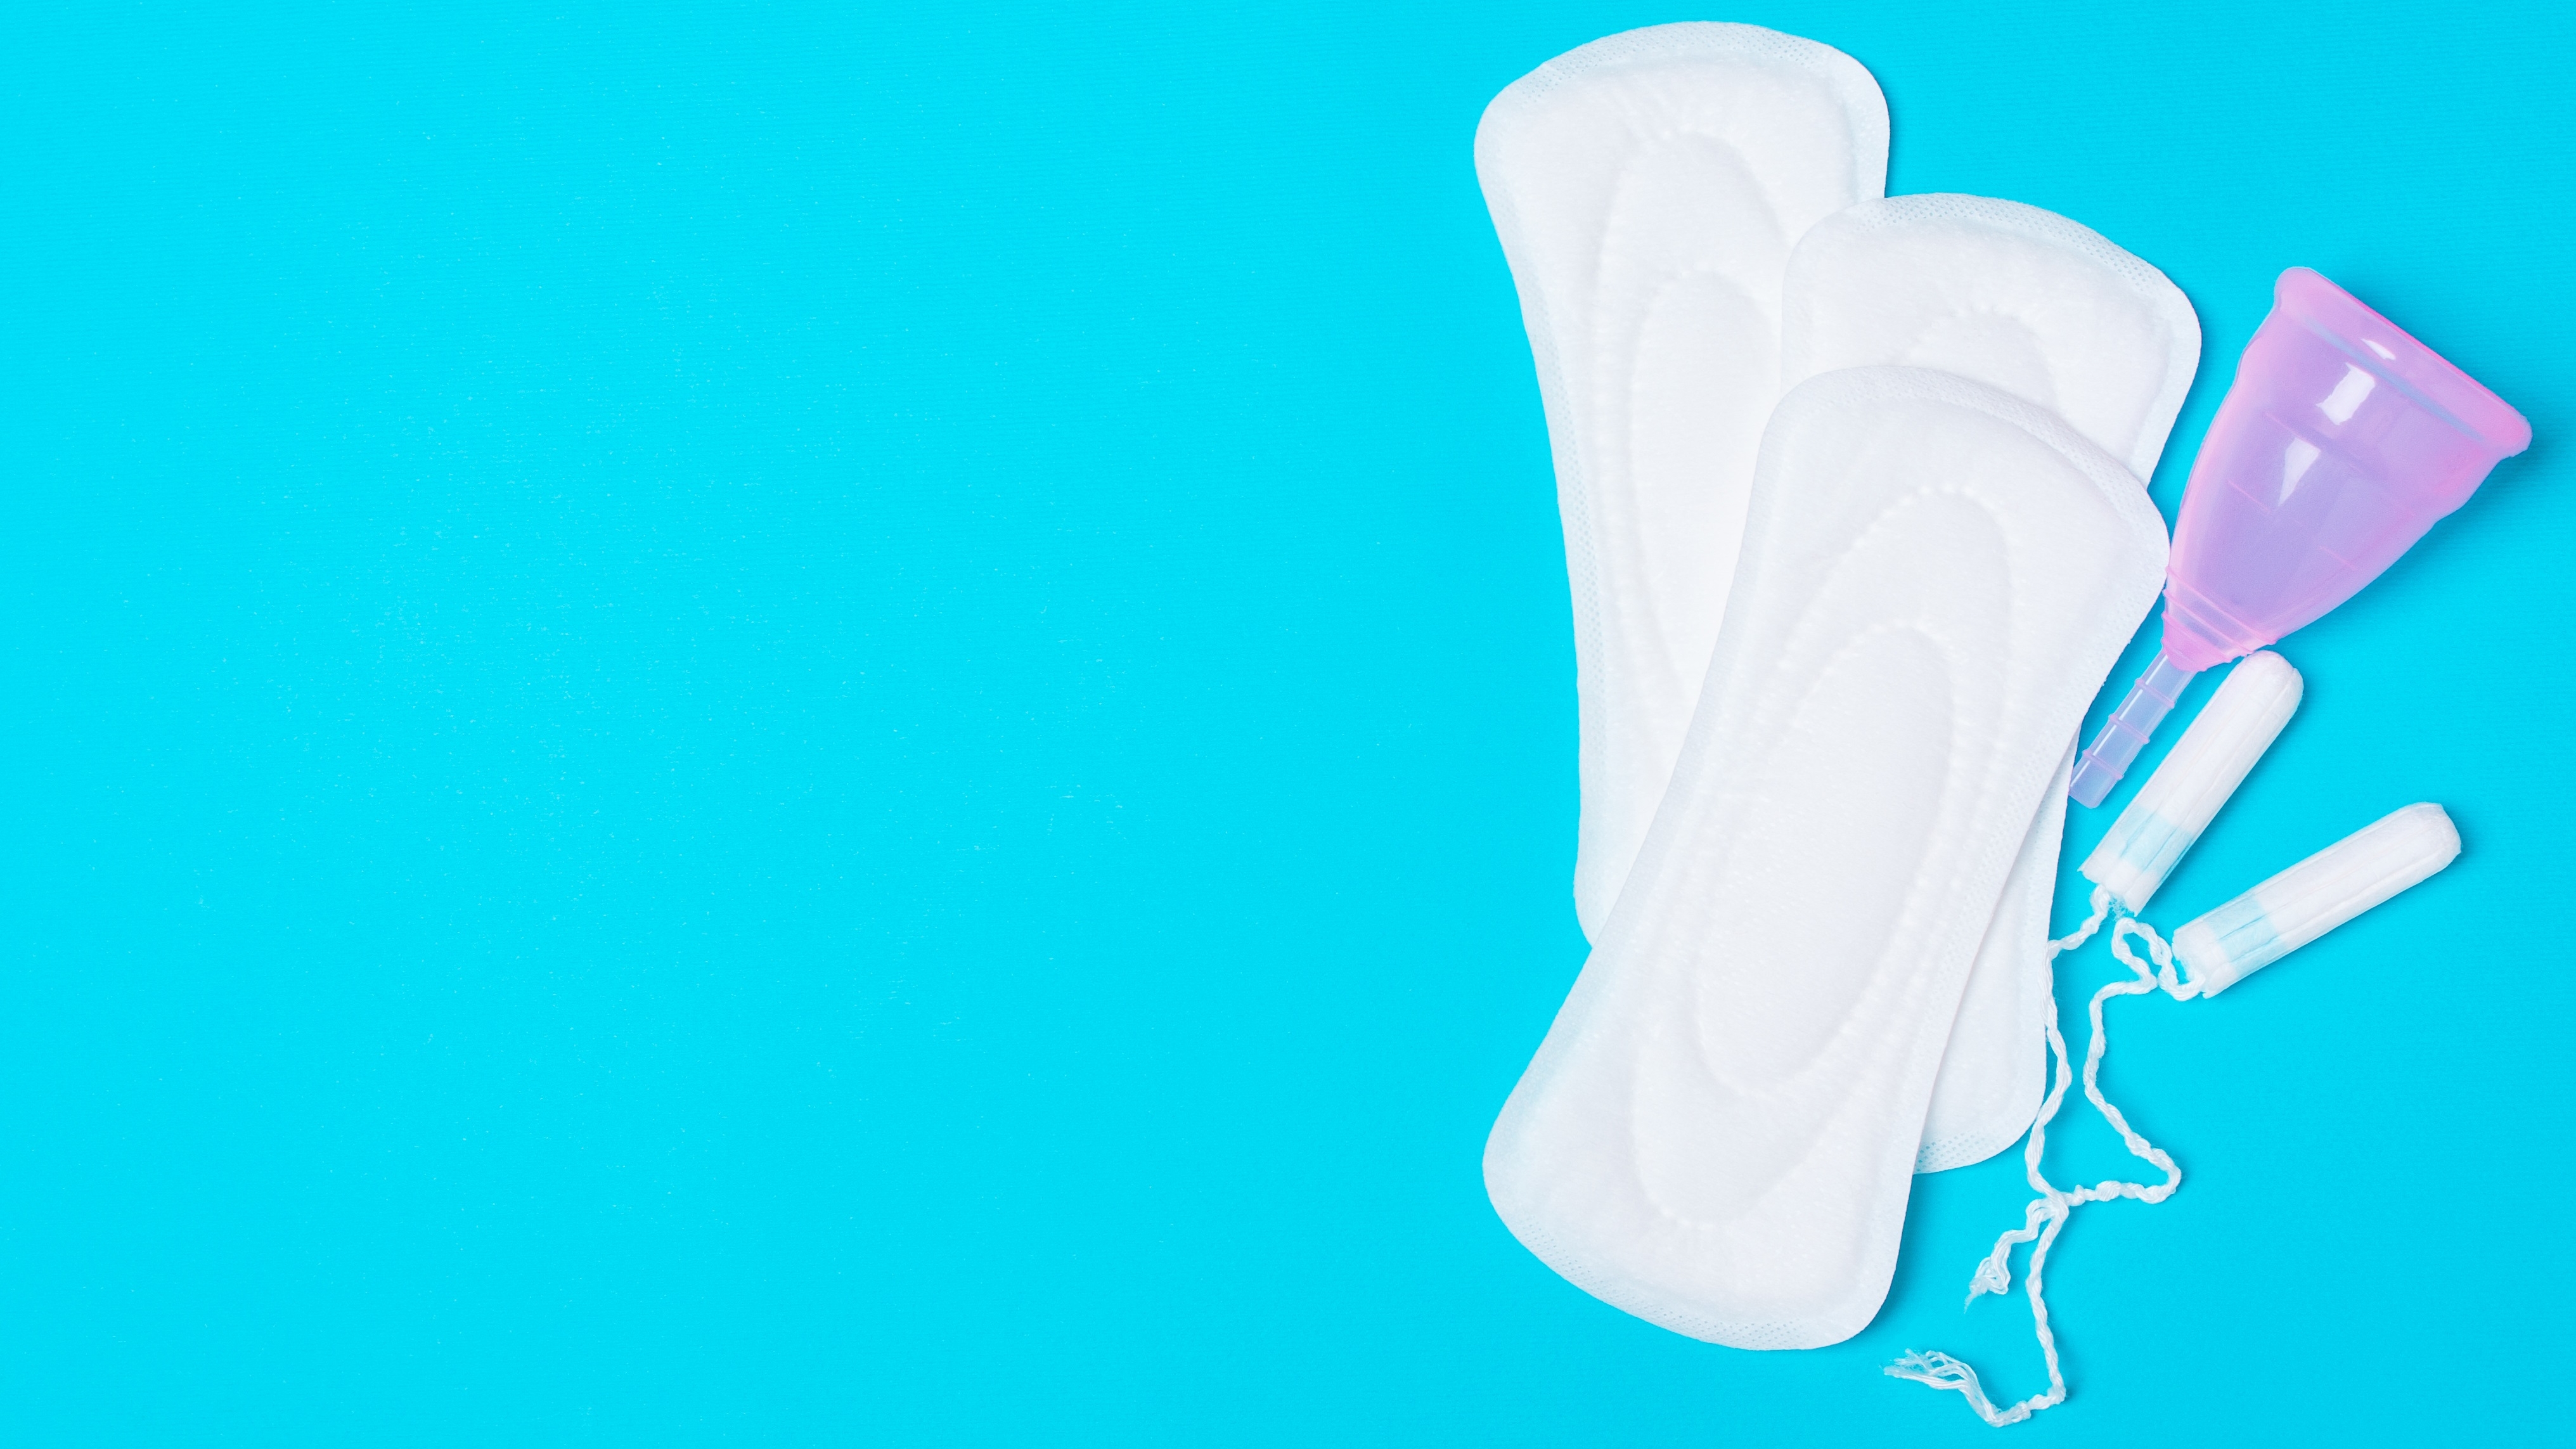 sanitary products: save money on tampons, pads & reusable sanitary products - MSE